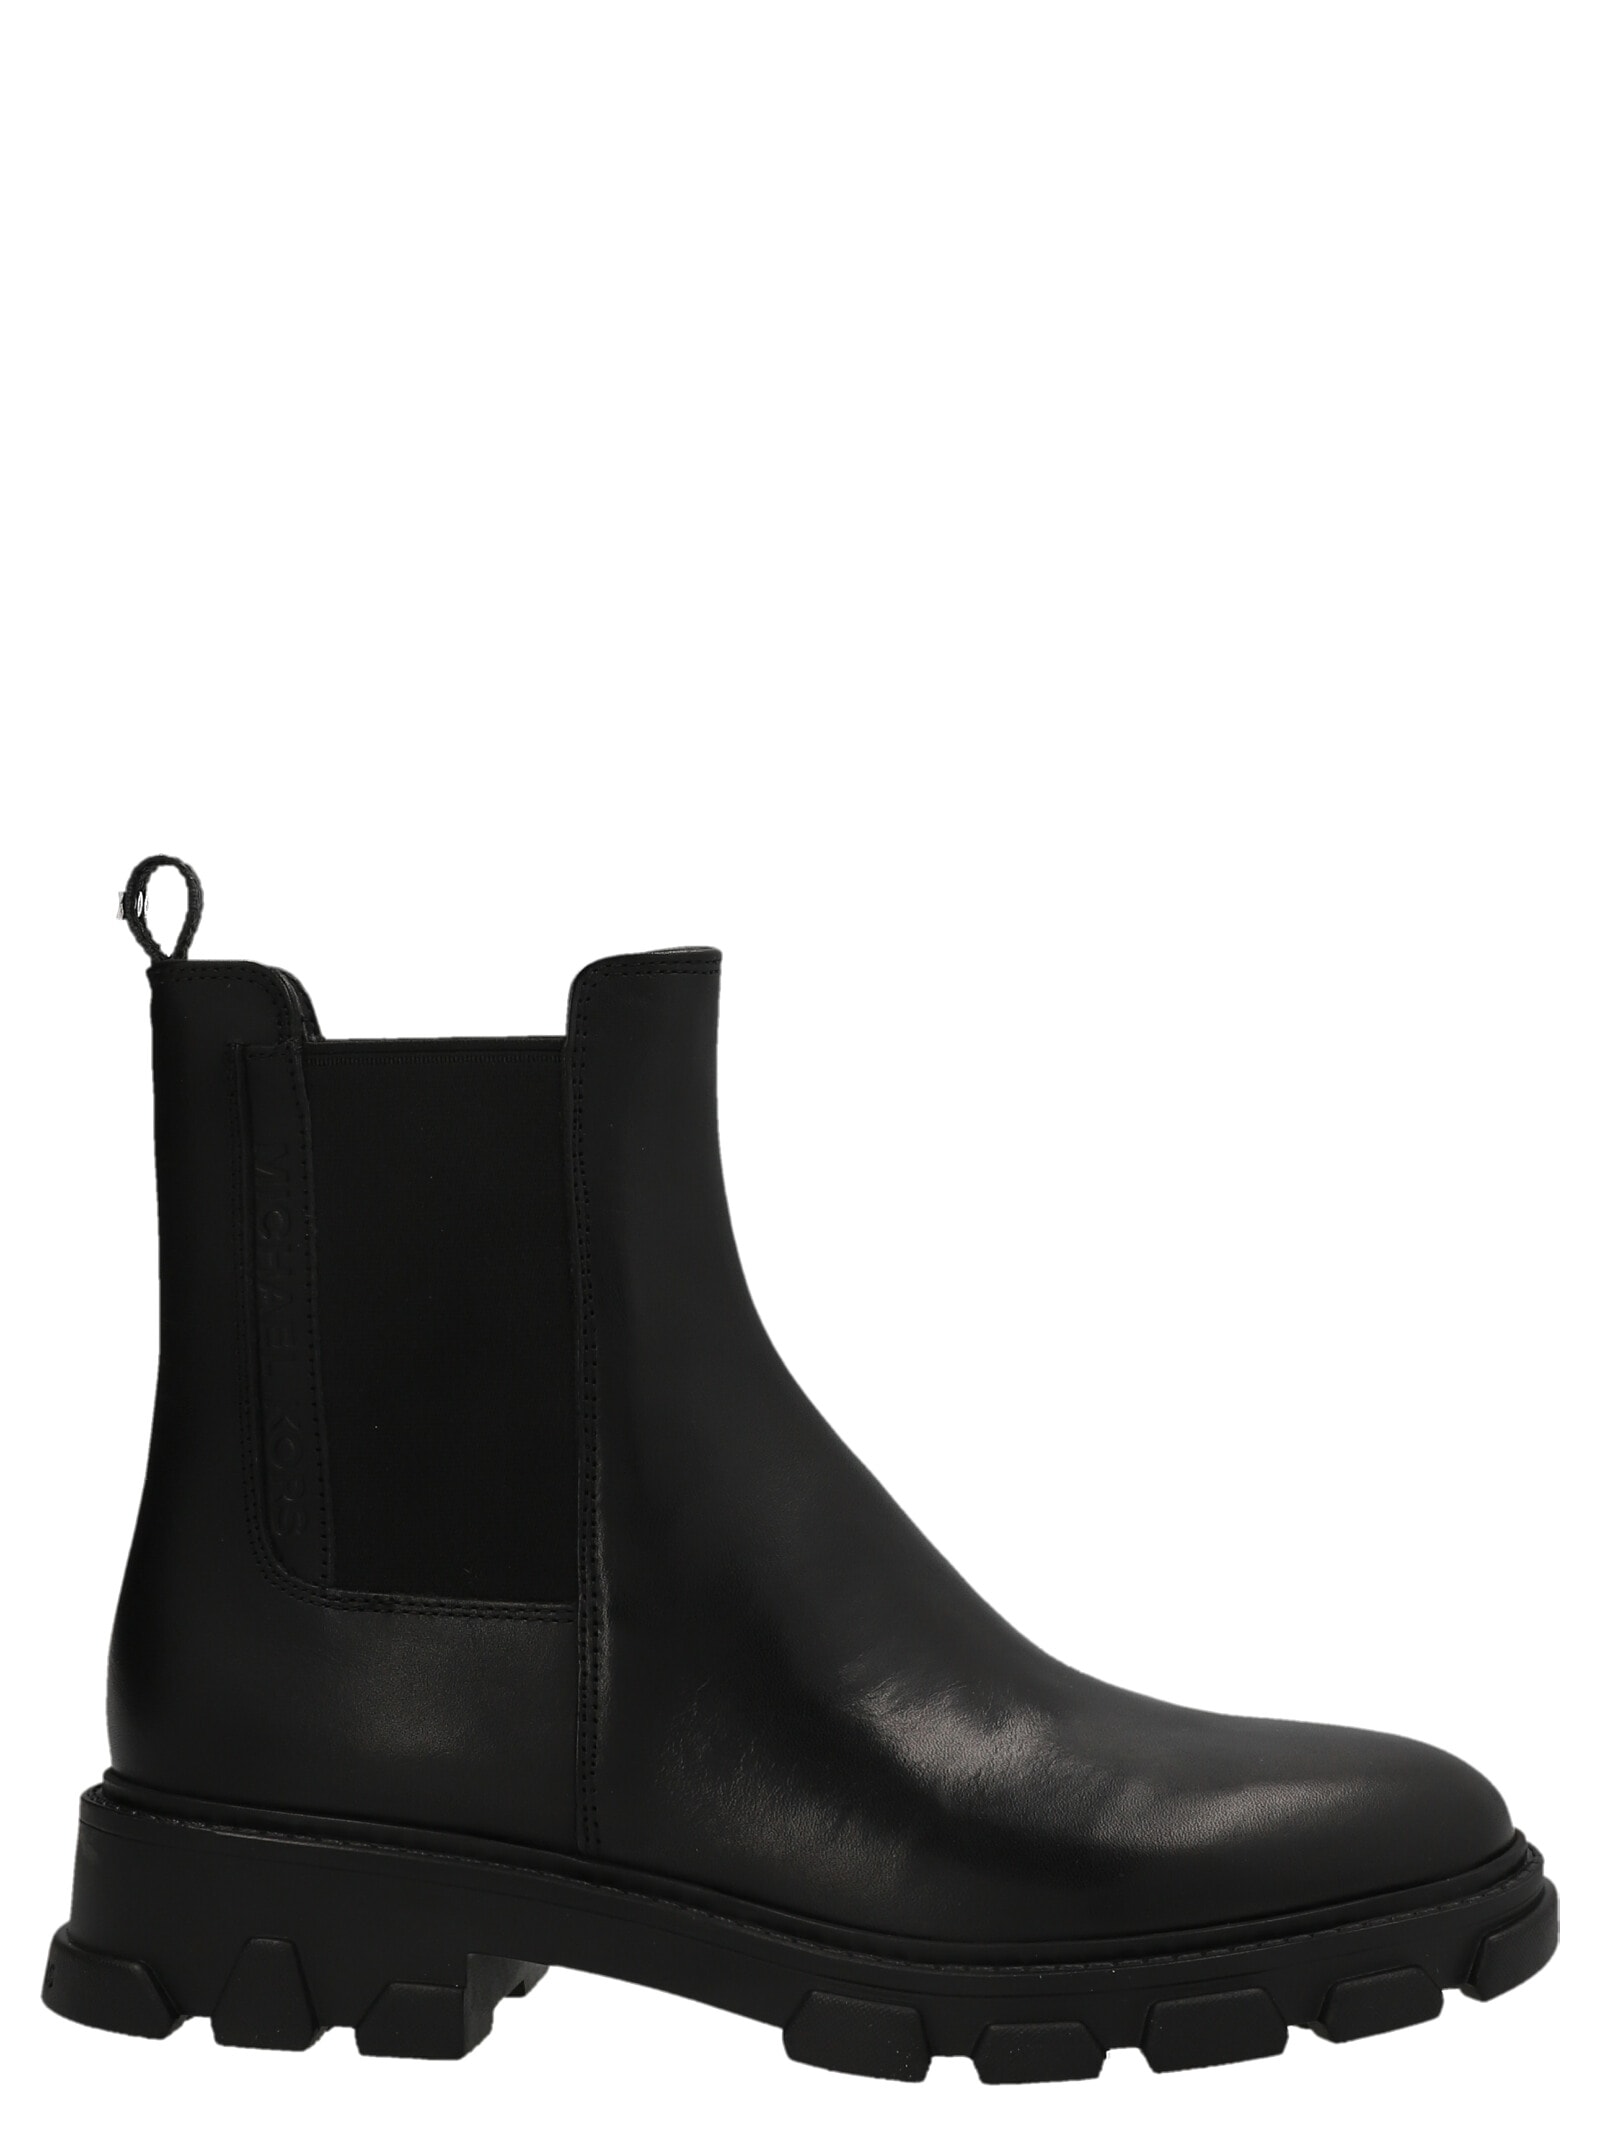 Michael Kors ridley Ankle Boots